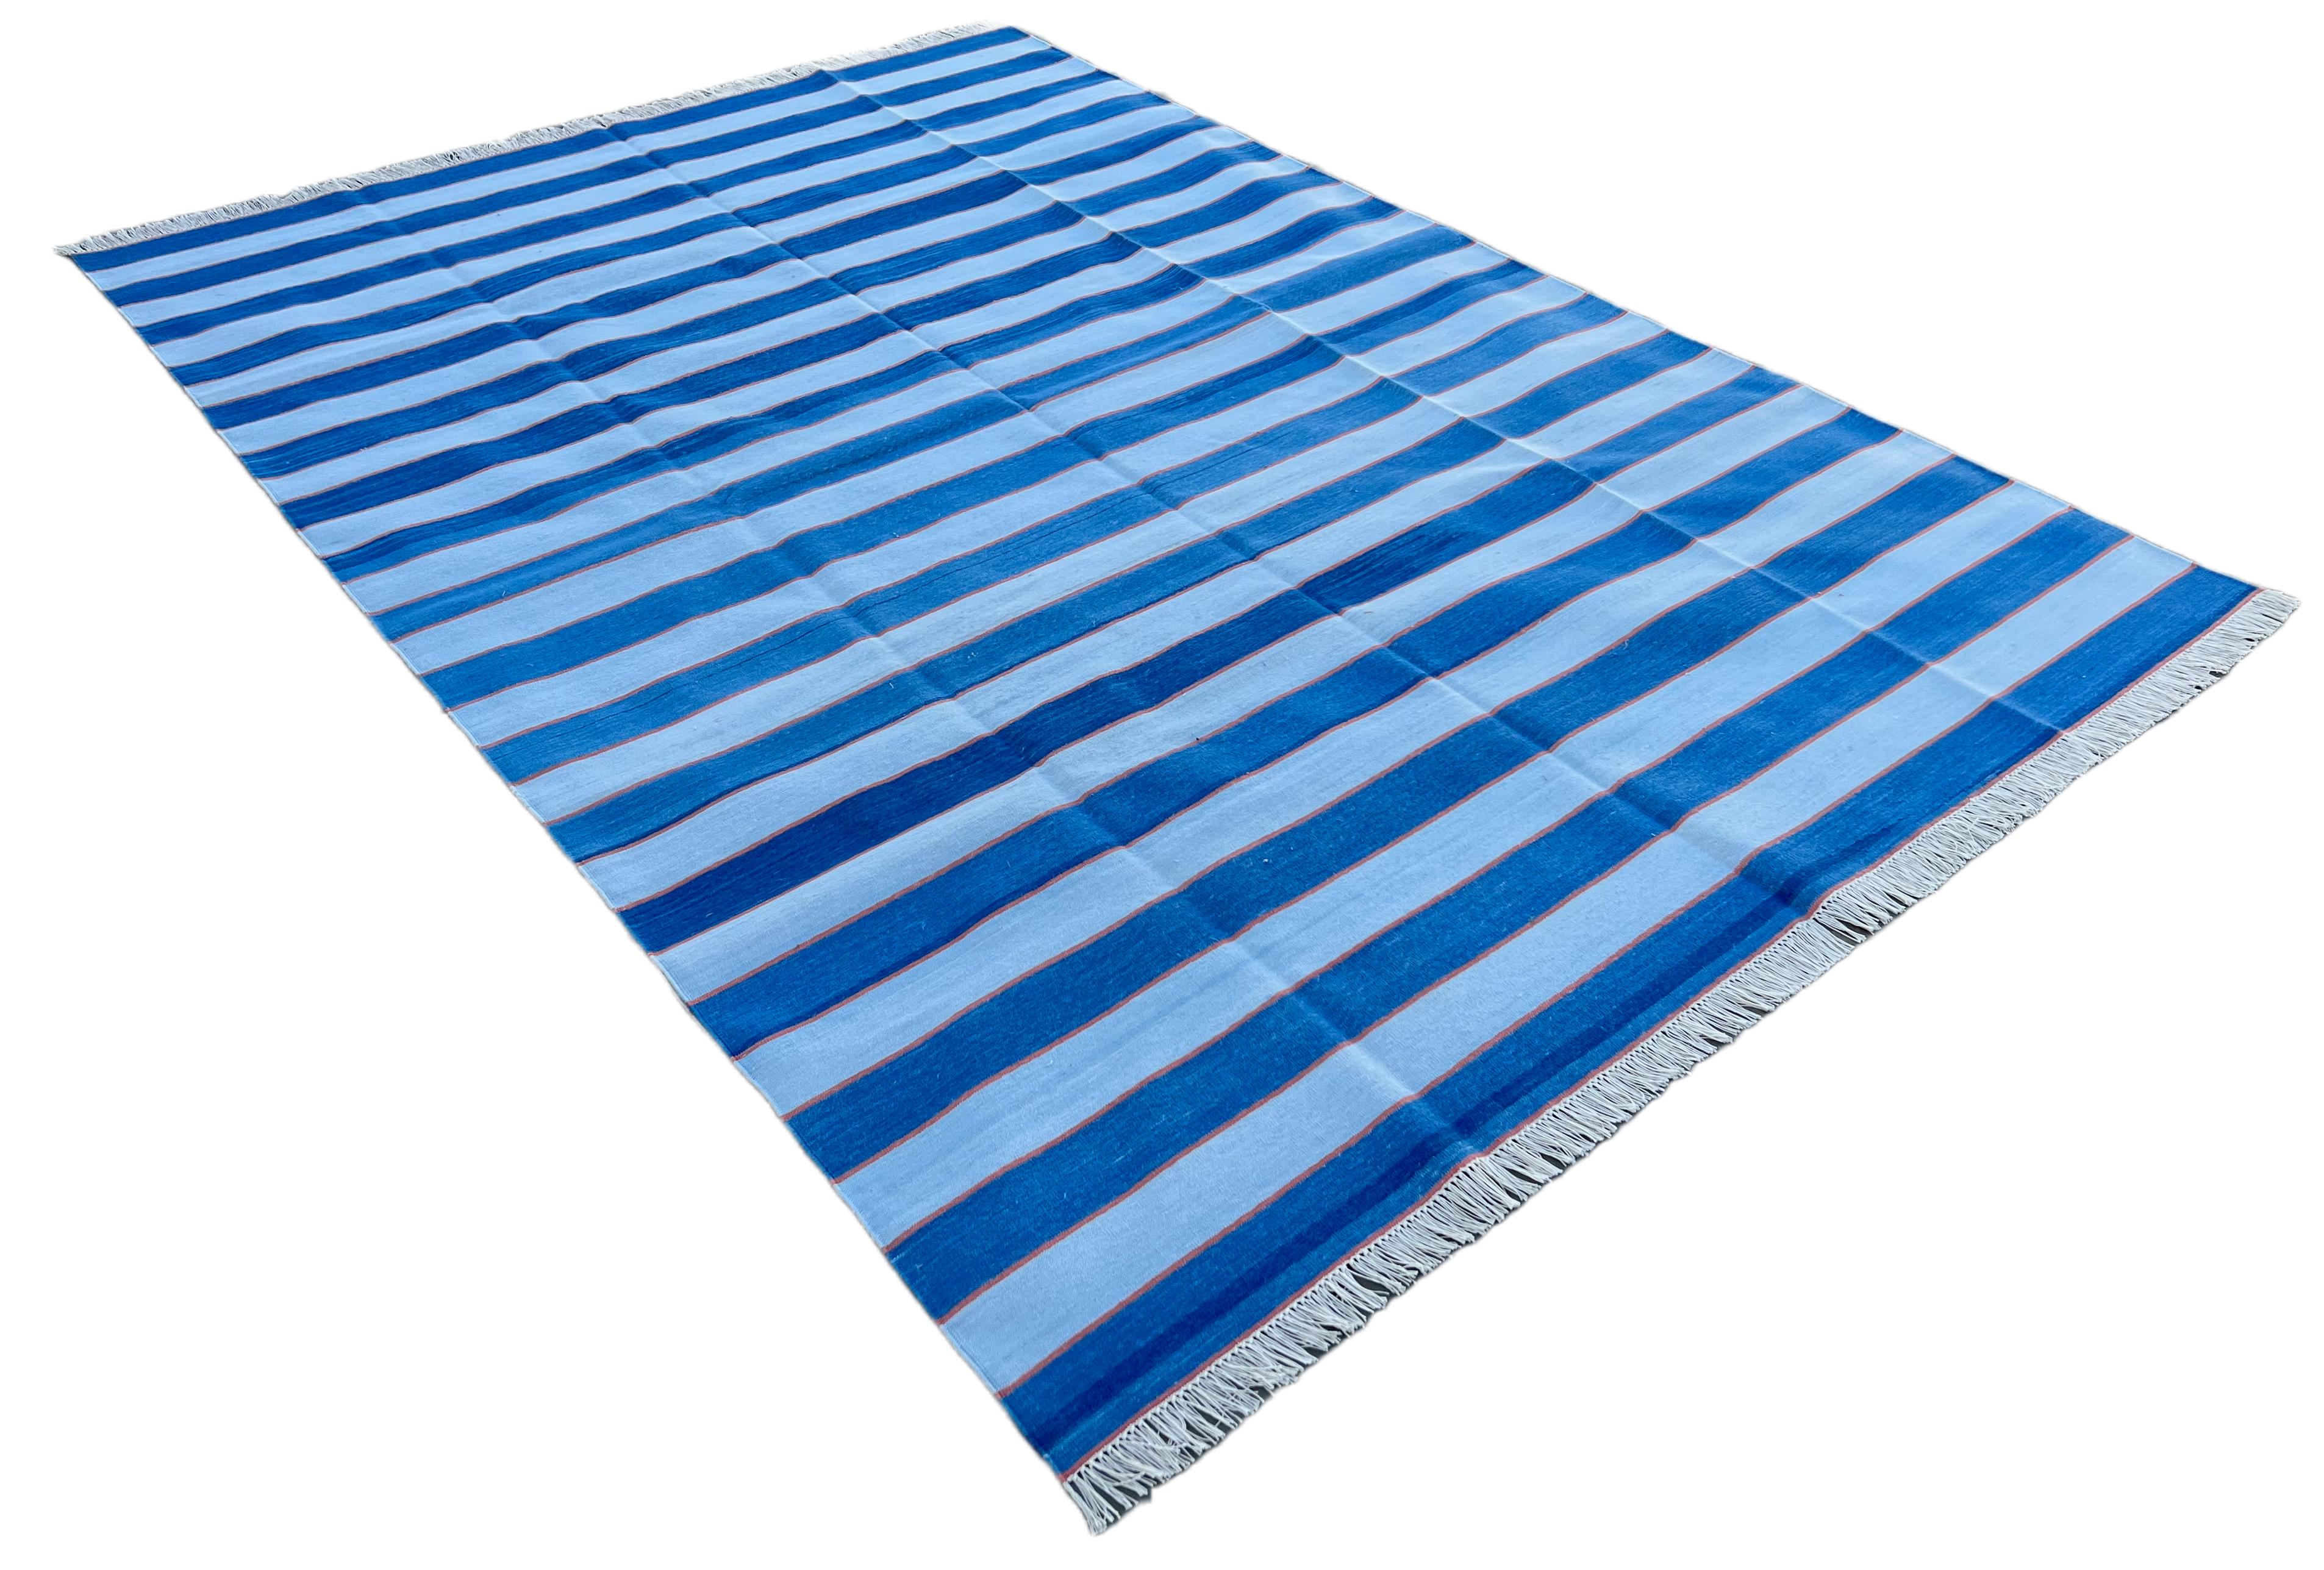 Cotton Vegetable Dyed Indigo Blue And Orange Striped Indian Dhurrie Rug-8'x10' 
These special flat-weave dhurries are hand-woven with 15 ply 100% cotton yarn. Due to the special manufacturing techniques used to create our rugs, the size and color of